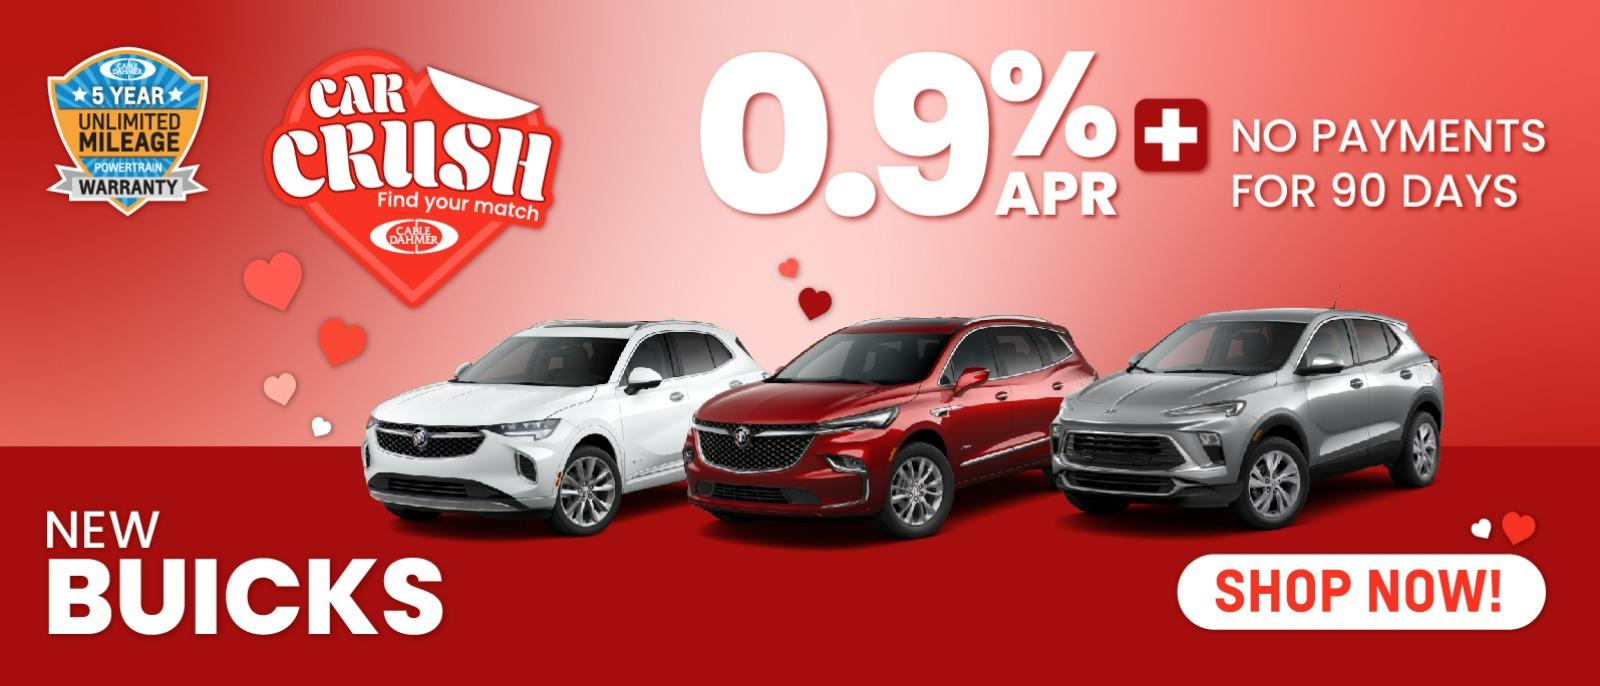 New Buick models for 0.9% apr.